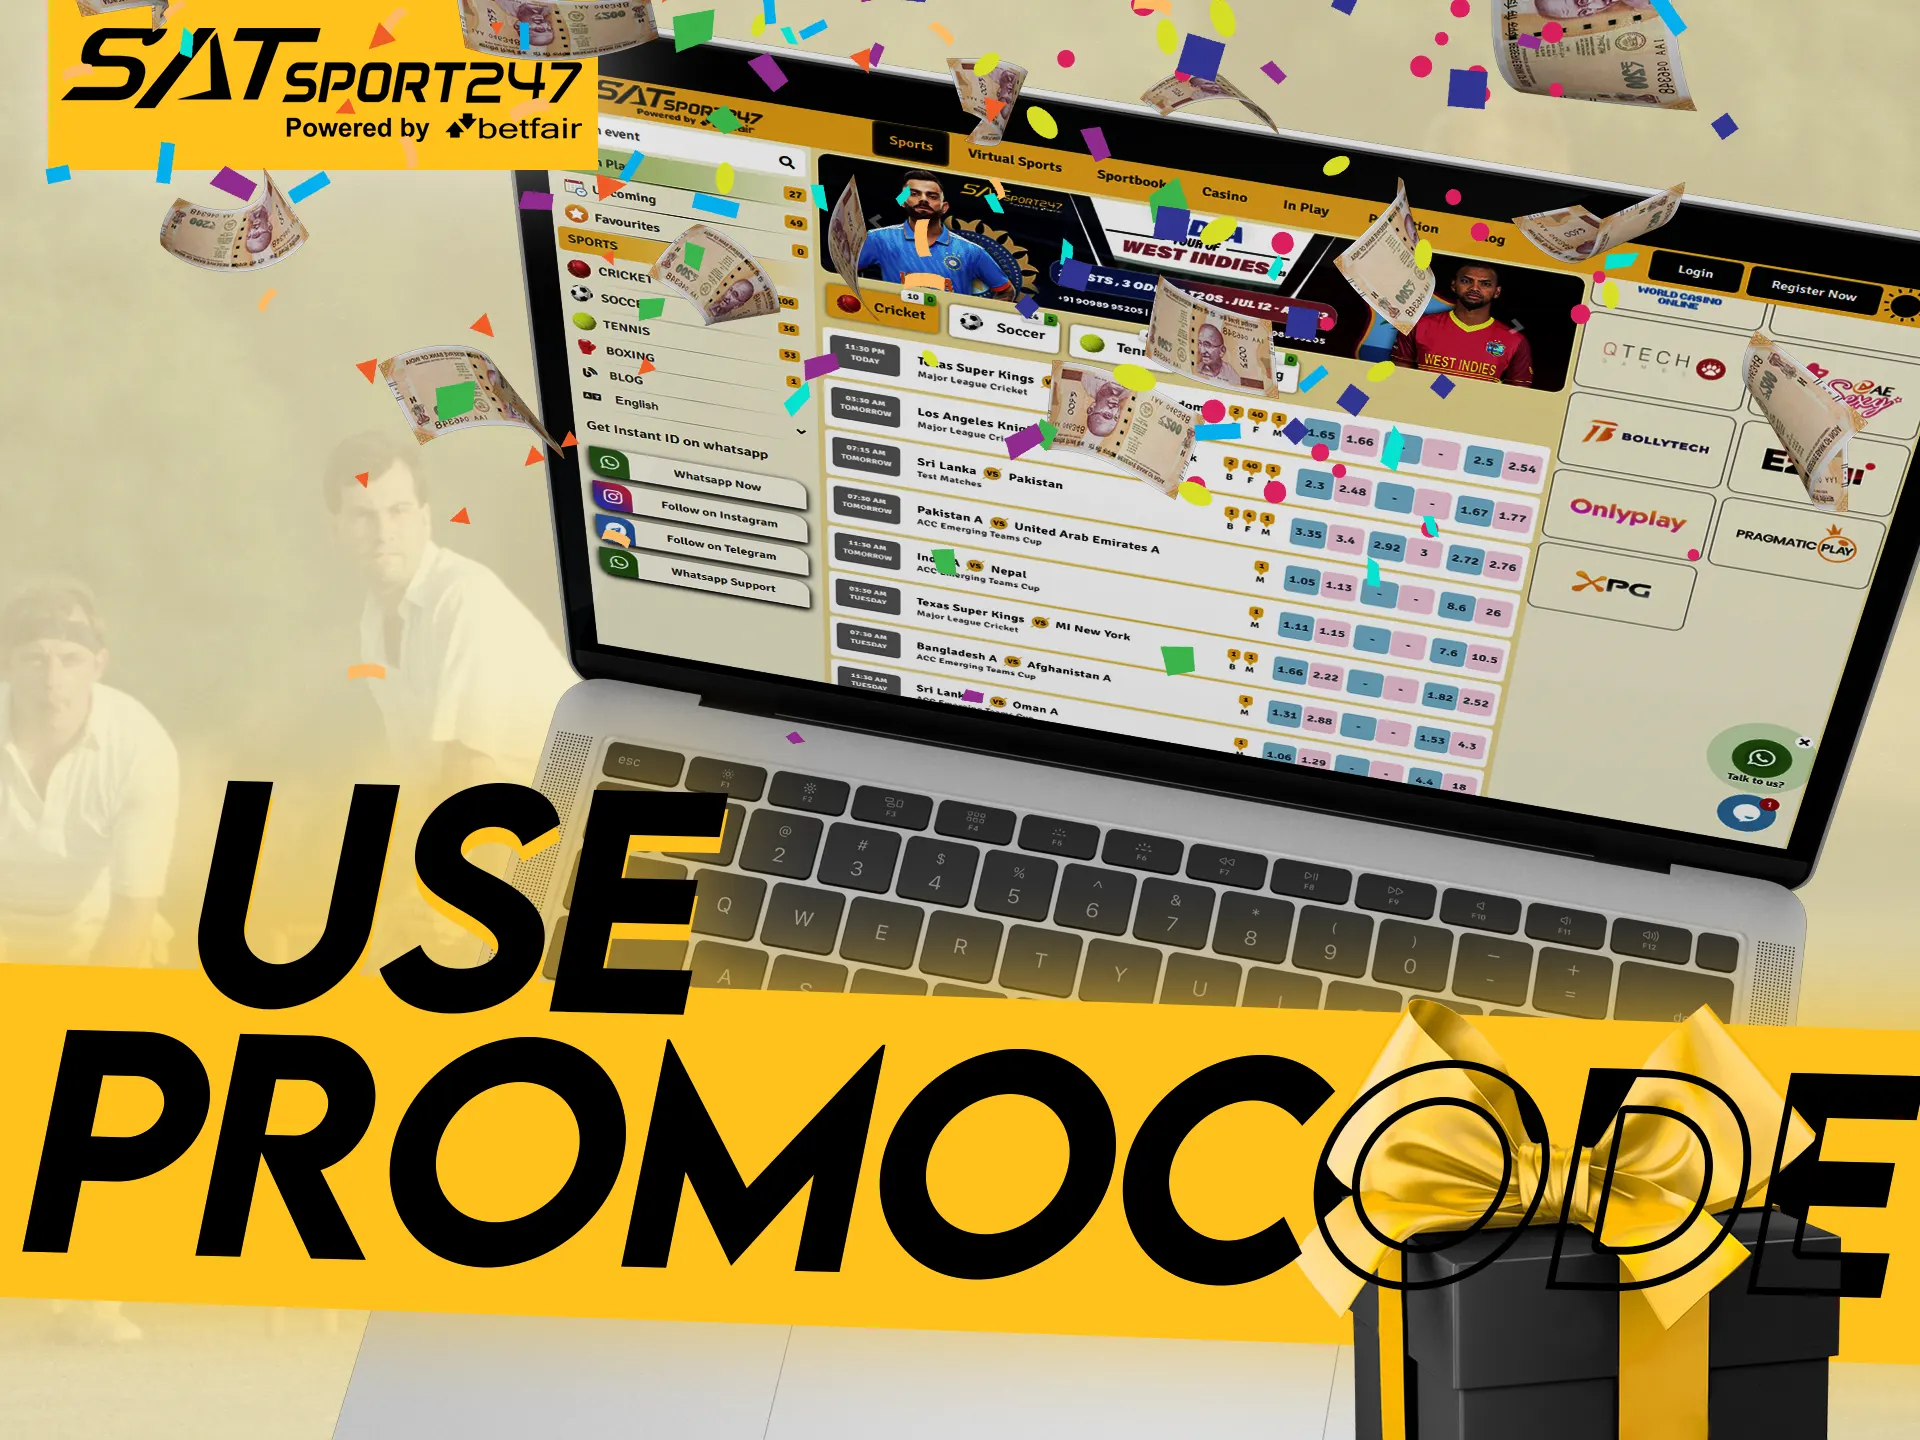 Use the special promo code for more benefits in betting and casino games with Satsport247.